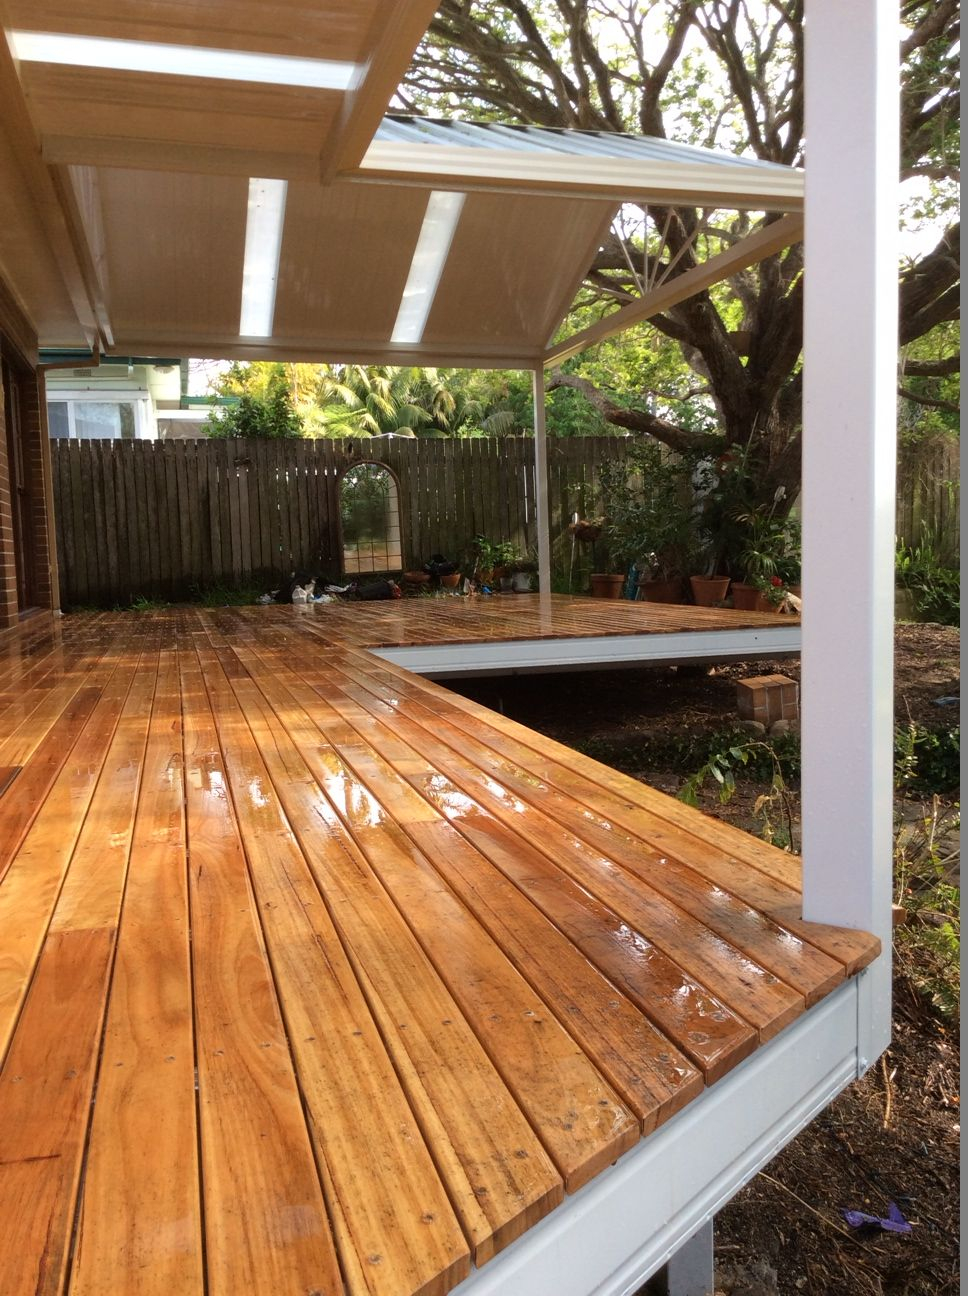 Spantec Boxspan Steel Frame Deck With Timber Decking Boards Over inside dimensions 968 X 1296